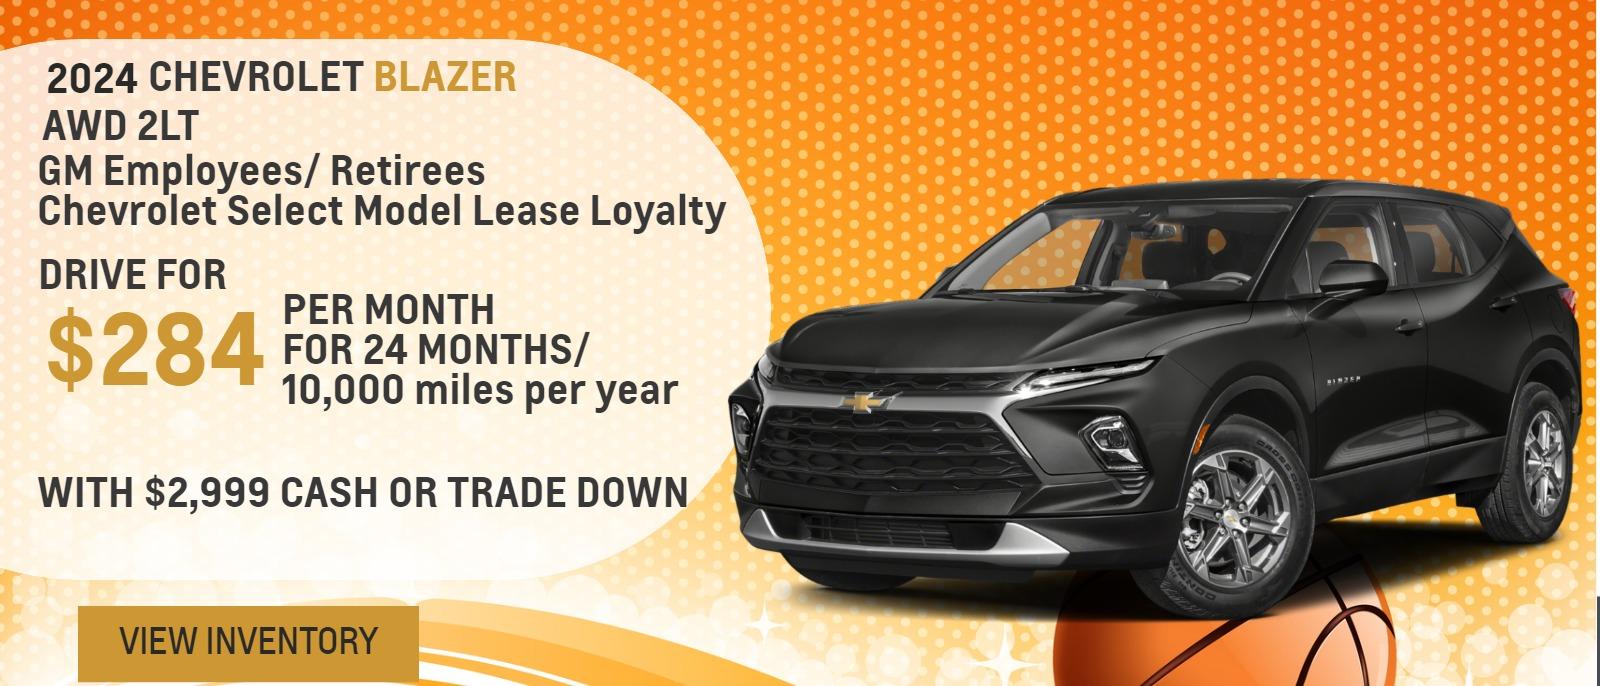 2024 Blazer AWD 2LT
GM Employees/ Retirees
Chevrolet Lease Loyalty

Drive for $284 per month
24 Months / 10,000 miles per year
With $2,999 cash or trade down